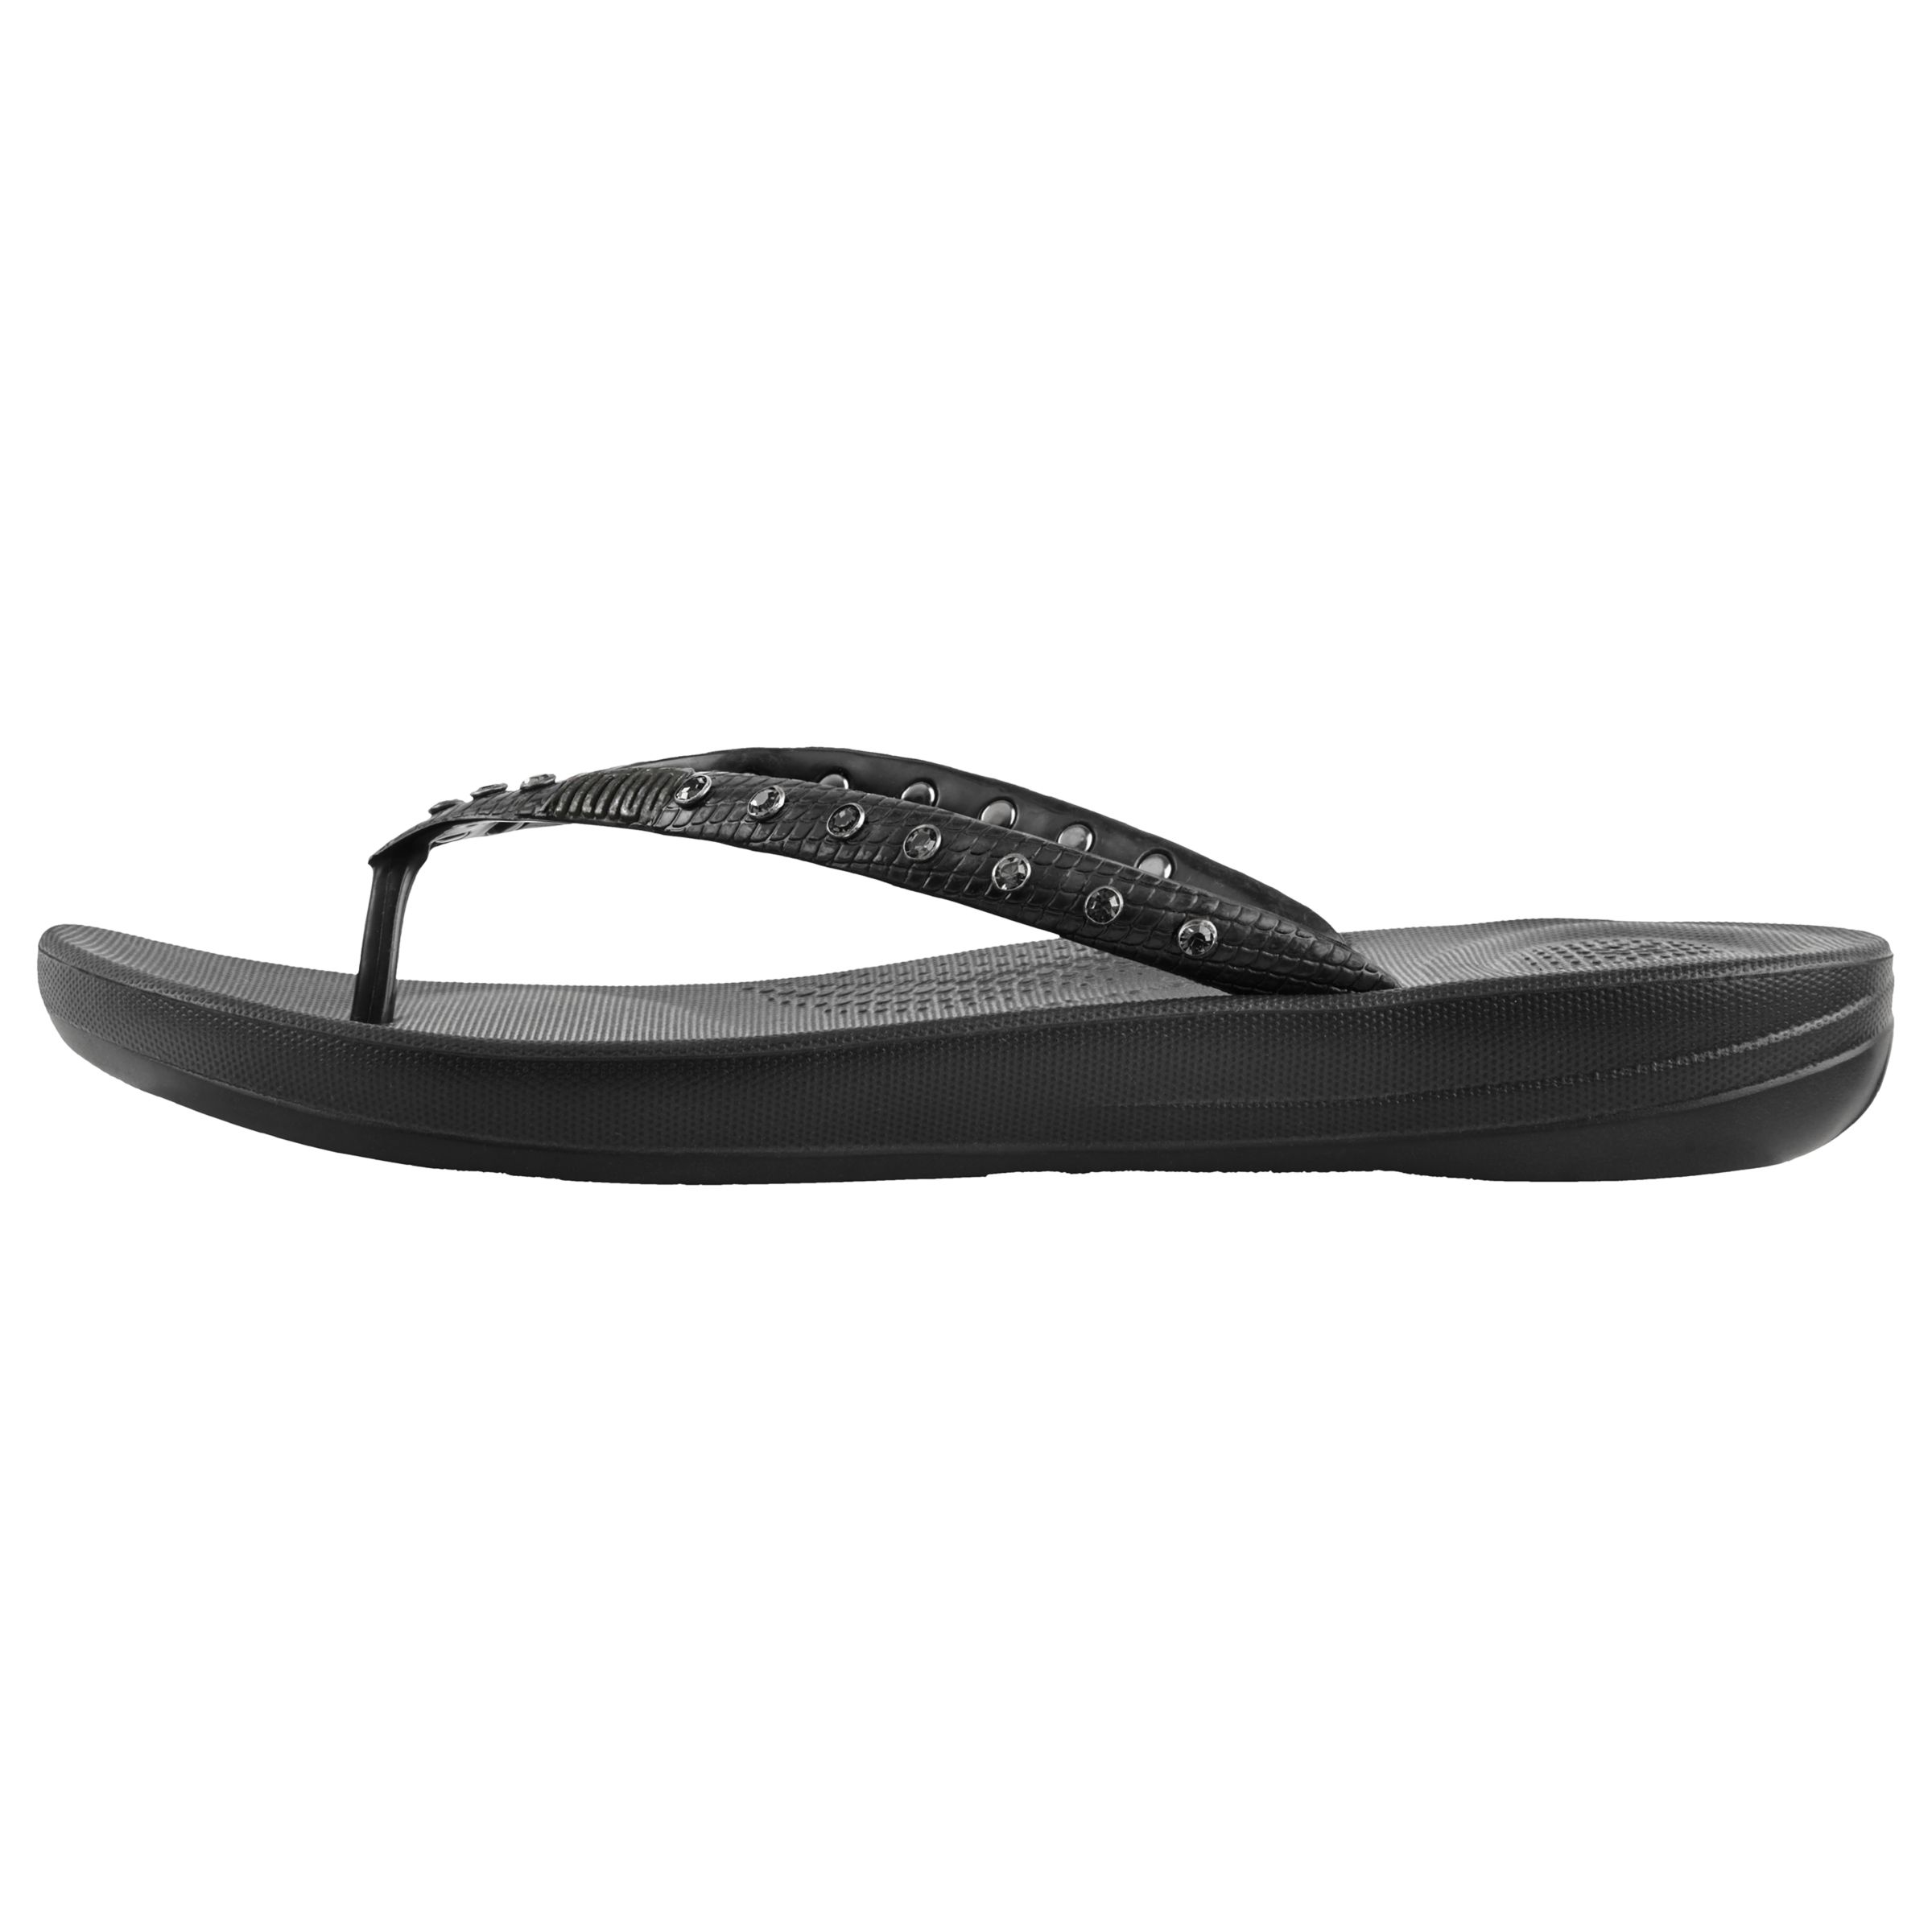 FitFlop Iqushion Crystal Flip Flops, Black